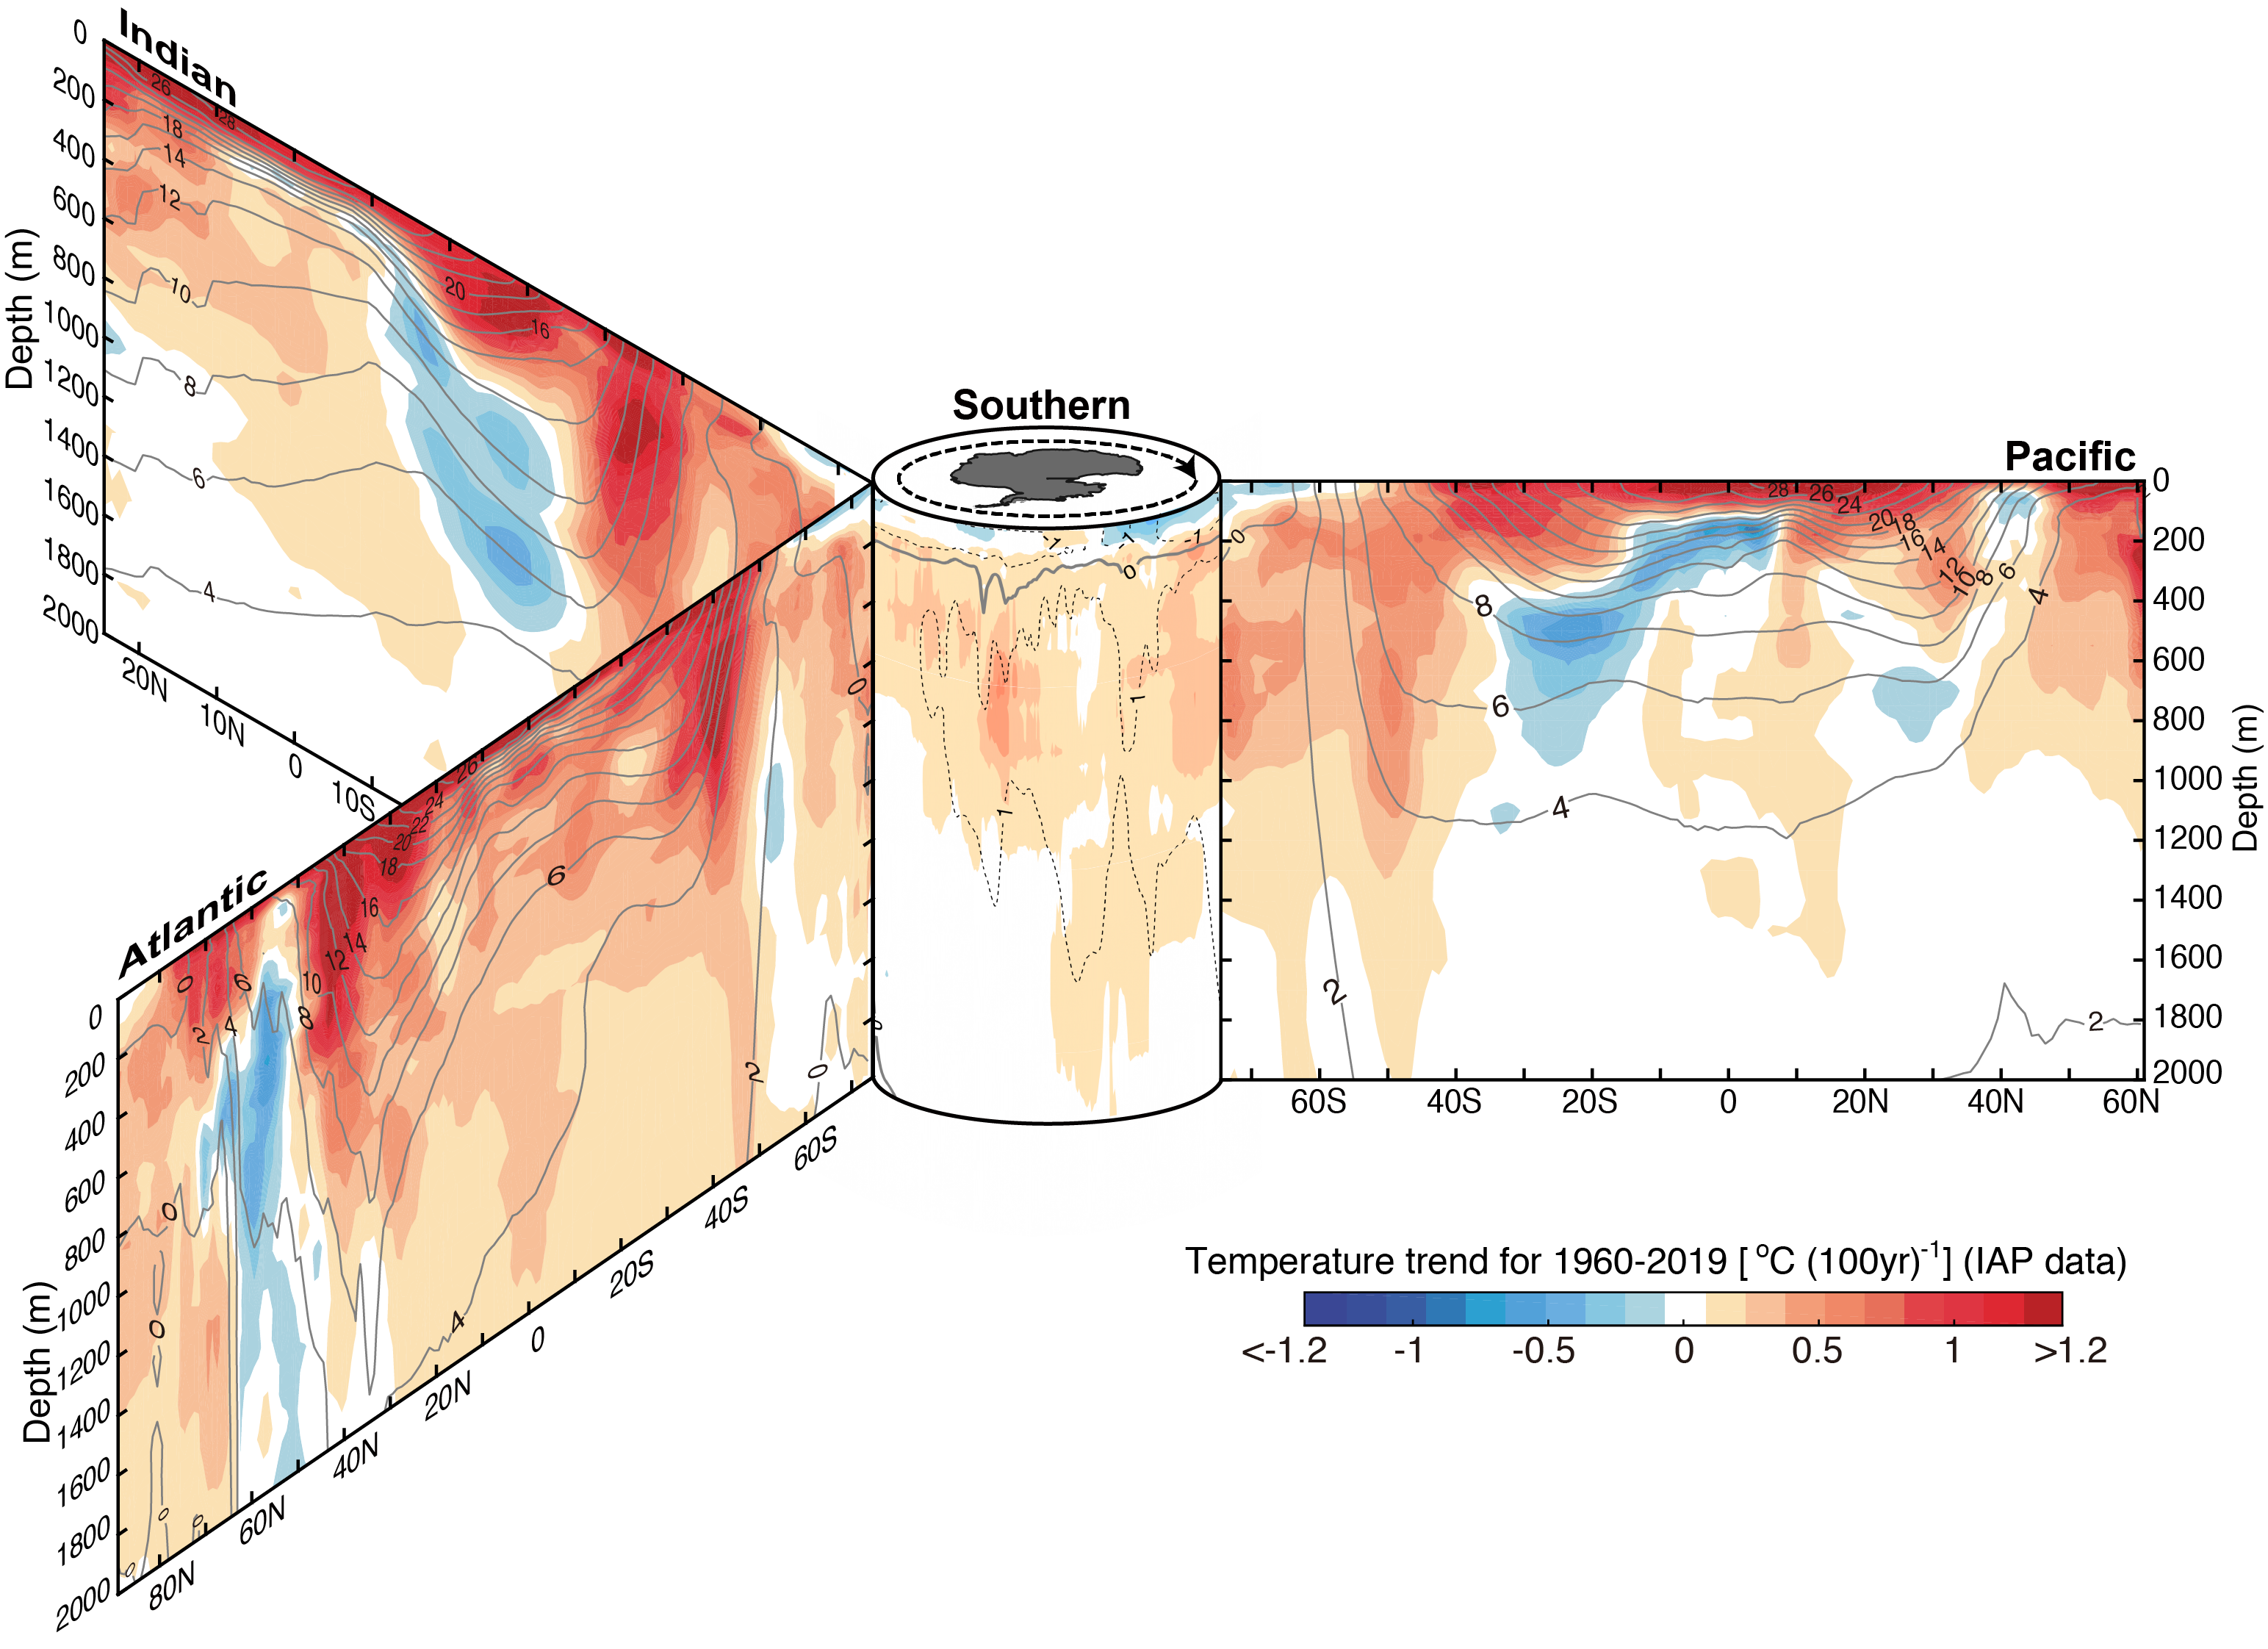 Sections of ocean temperature changes.